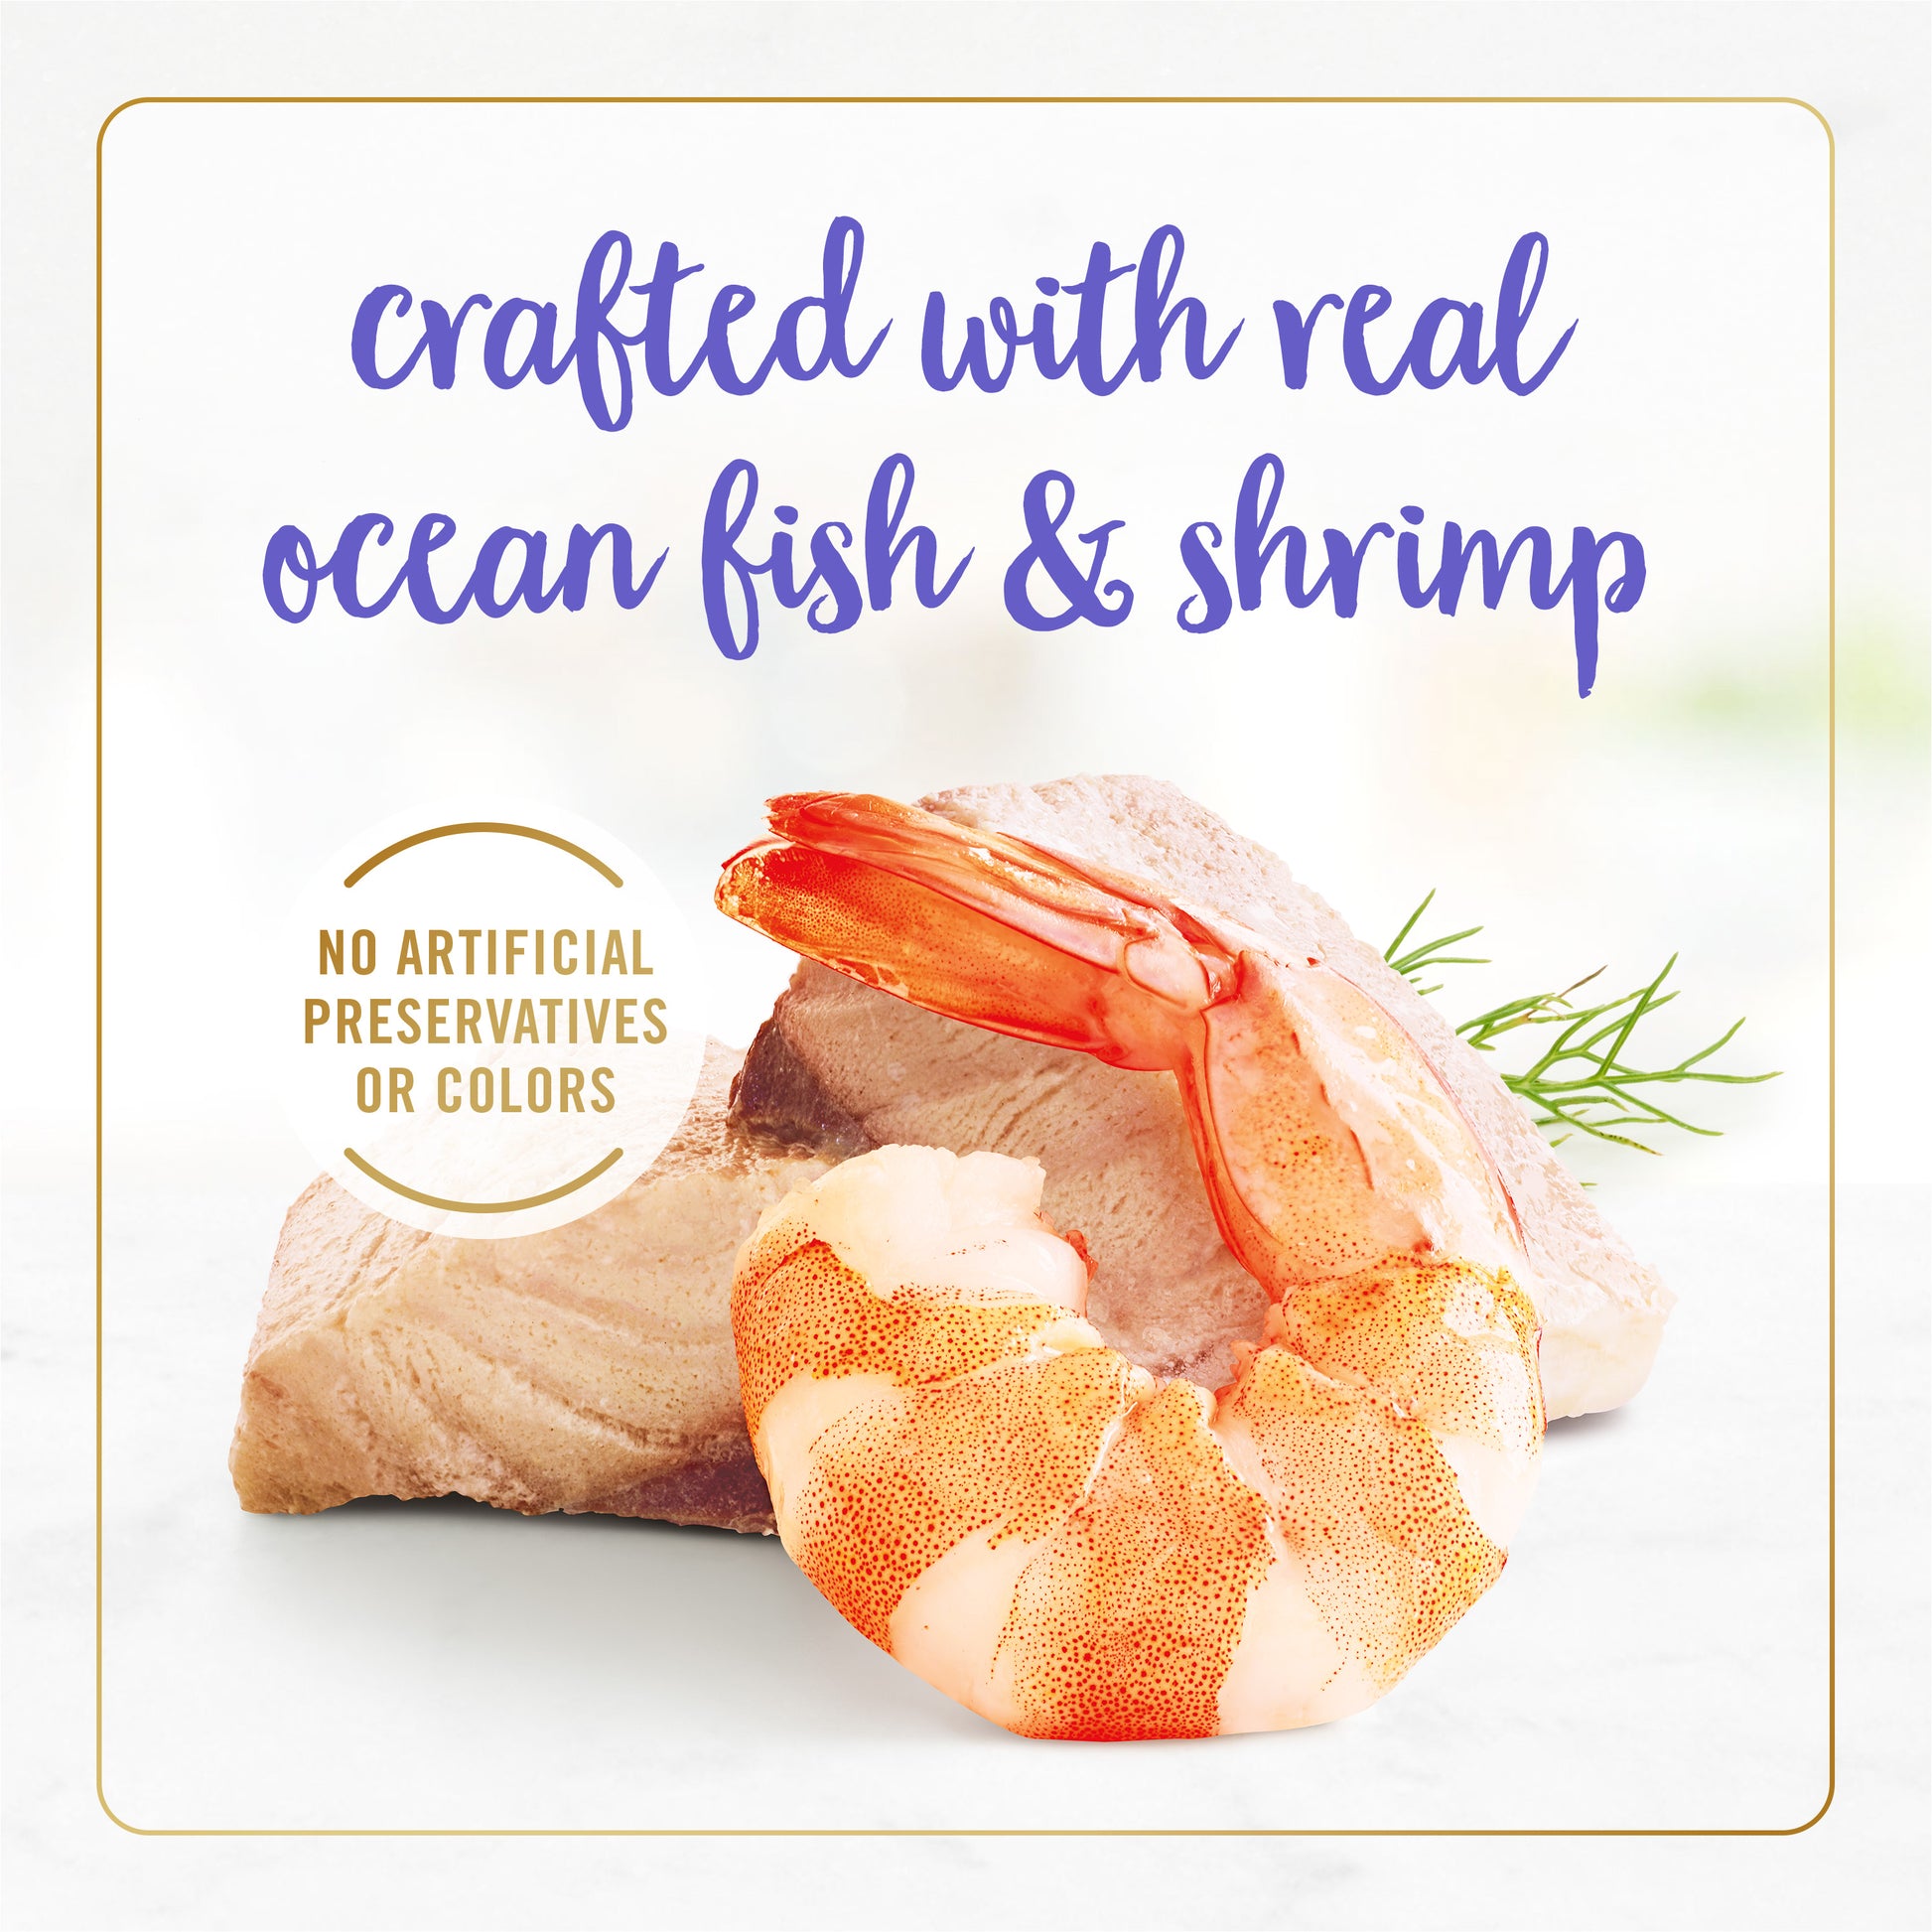 Crafted with real ocean fish and shrimp. No artificial preservatives or colors.